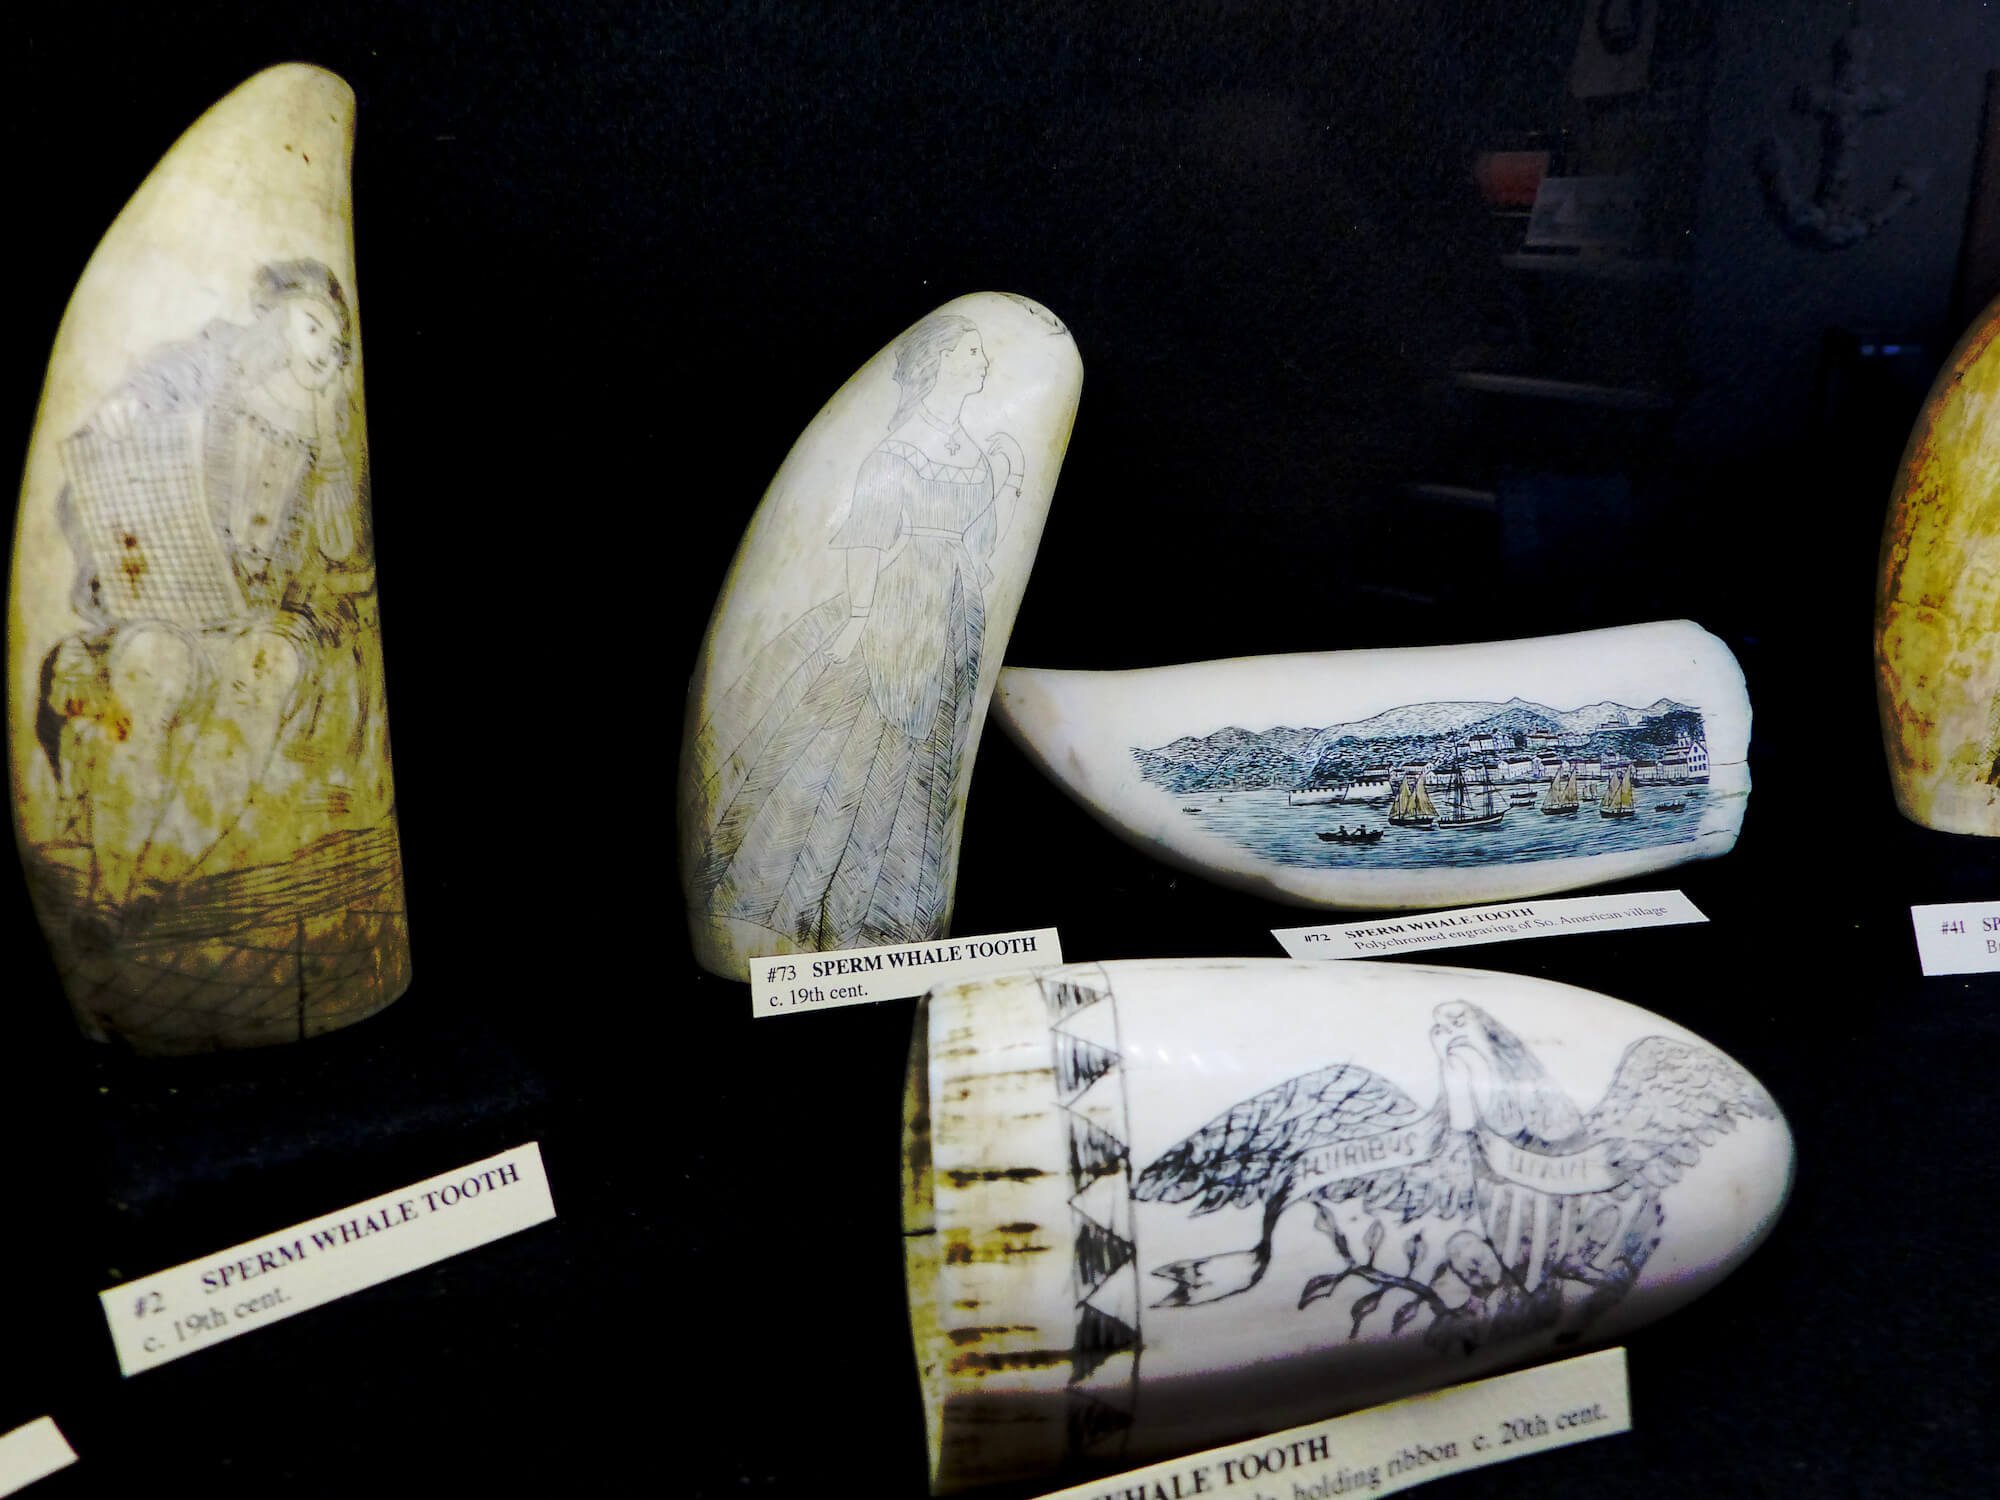  This scrimshaw exhibit is the largest private collection of scrimshaw displayed on Cape Cod. Collected by Elizabeth and William Graham over ten years of marriage, this extensive collection includes carved ivory, whale teeth, bone, baleen, and other 